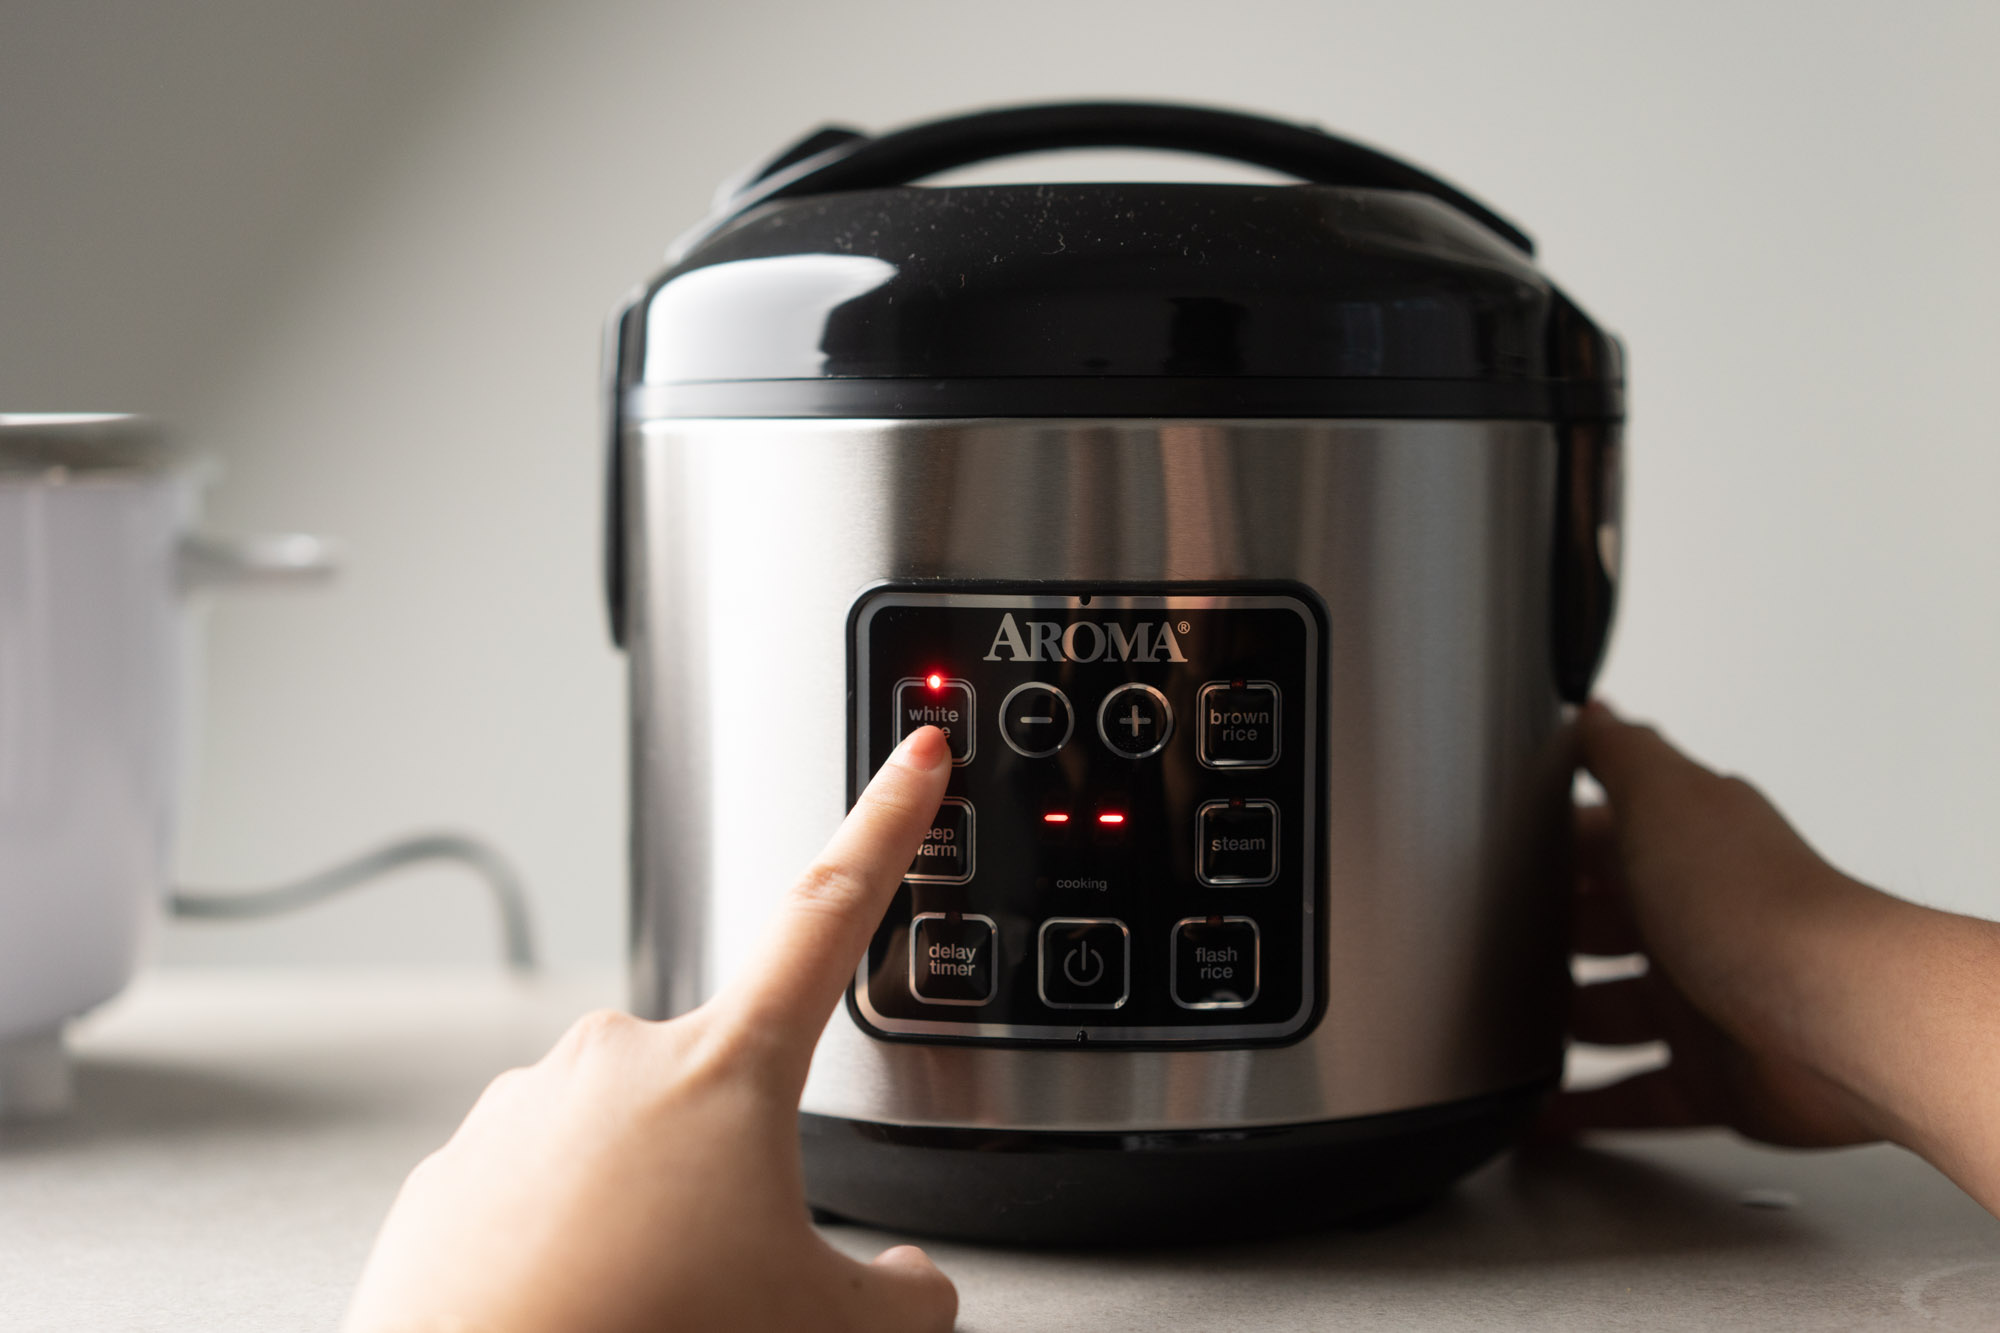 #howto #rice cooker #steamer How to Use Aroma Professional Plus  Rice/Multicooker 